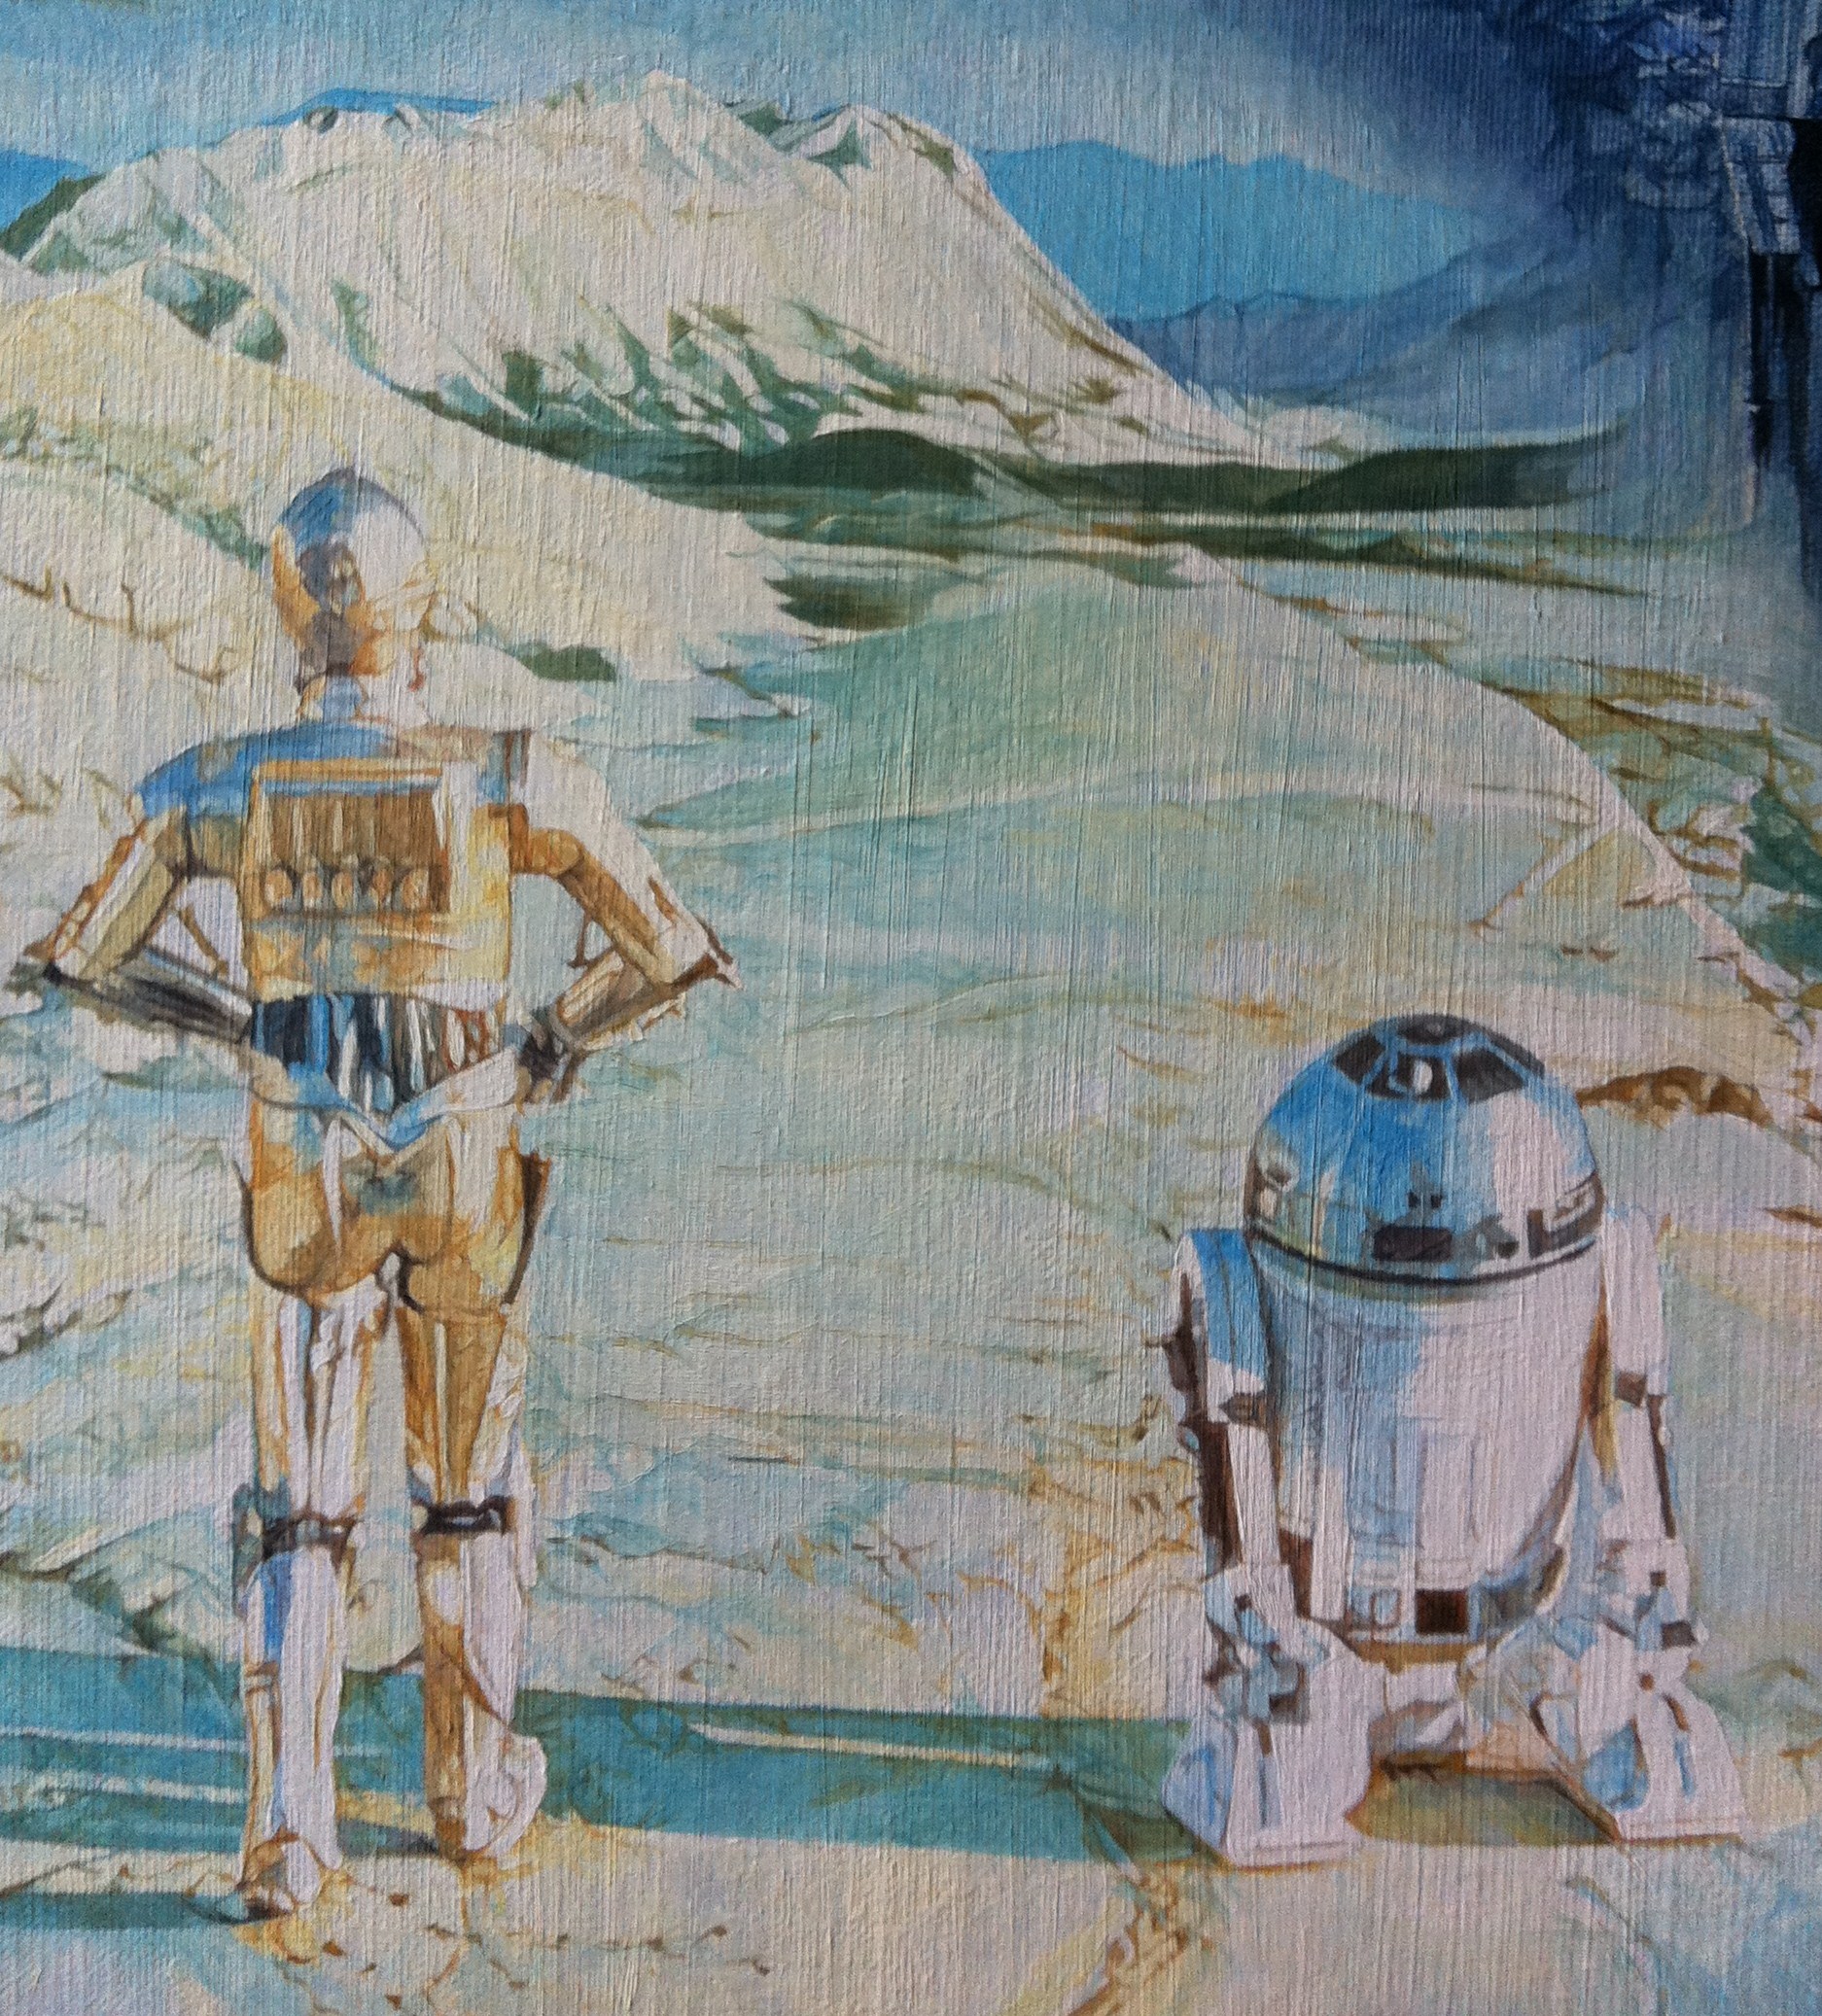 Star wars (in oil) close-up